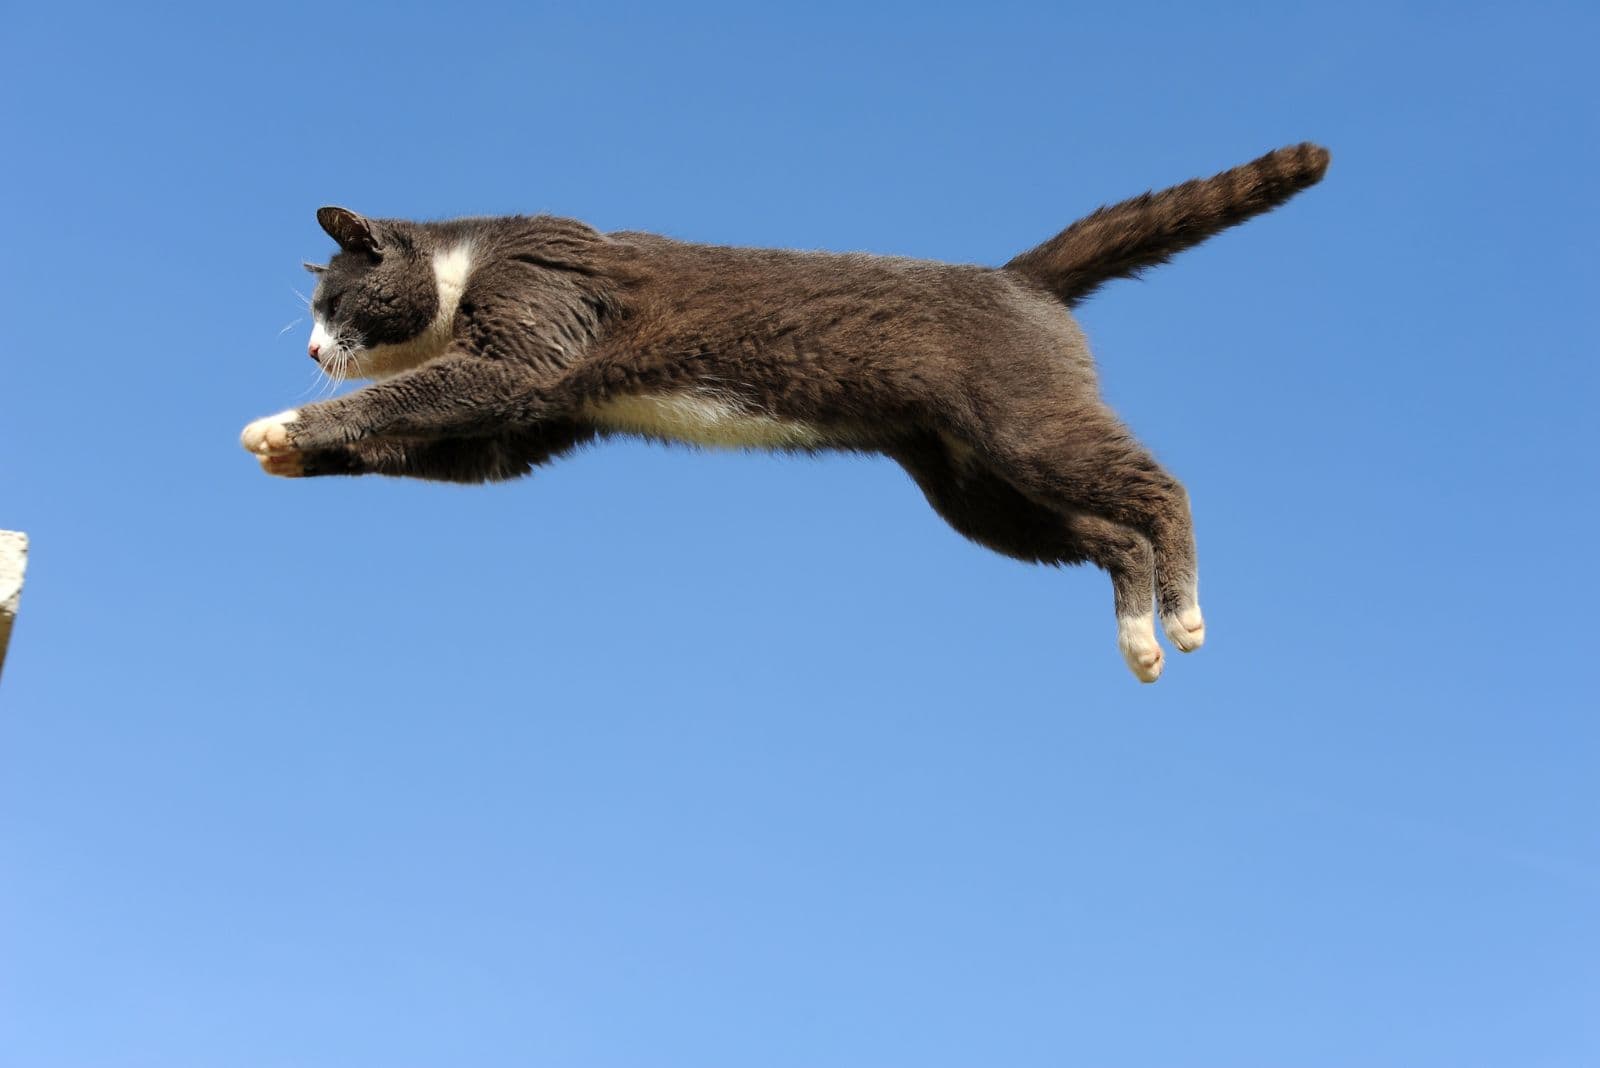 photo of a cat mid jump